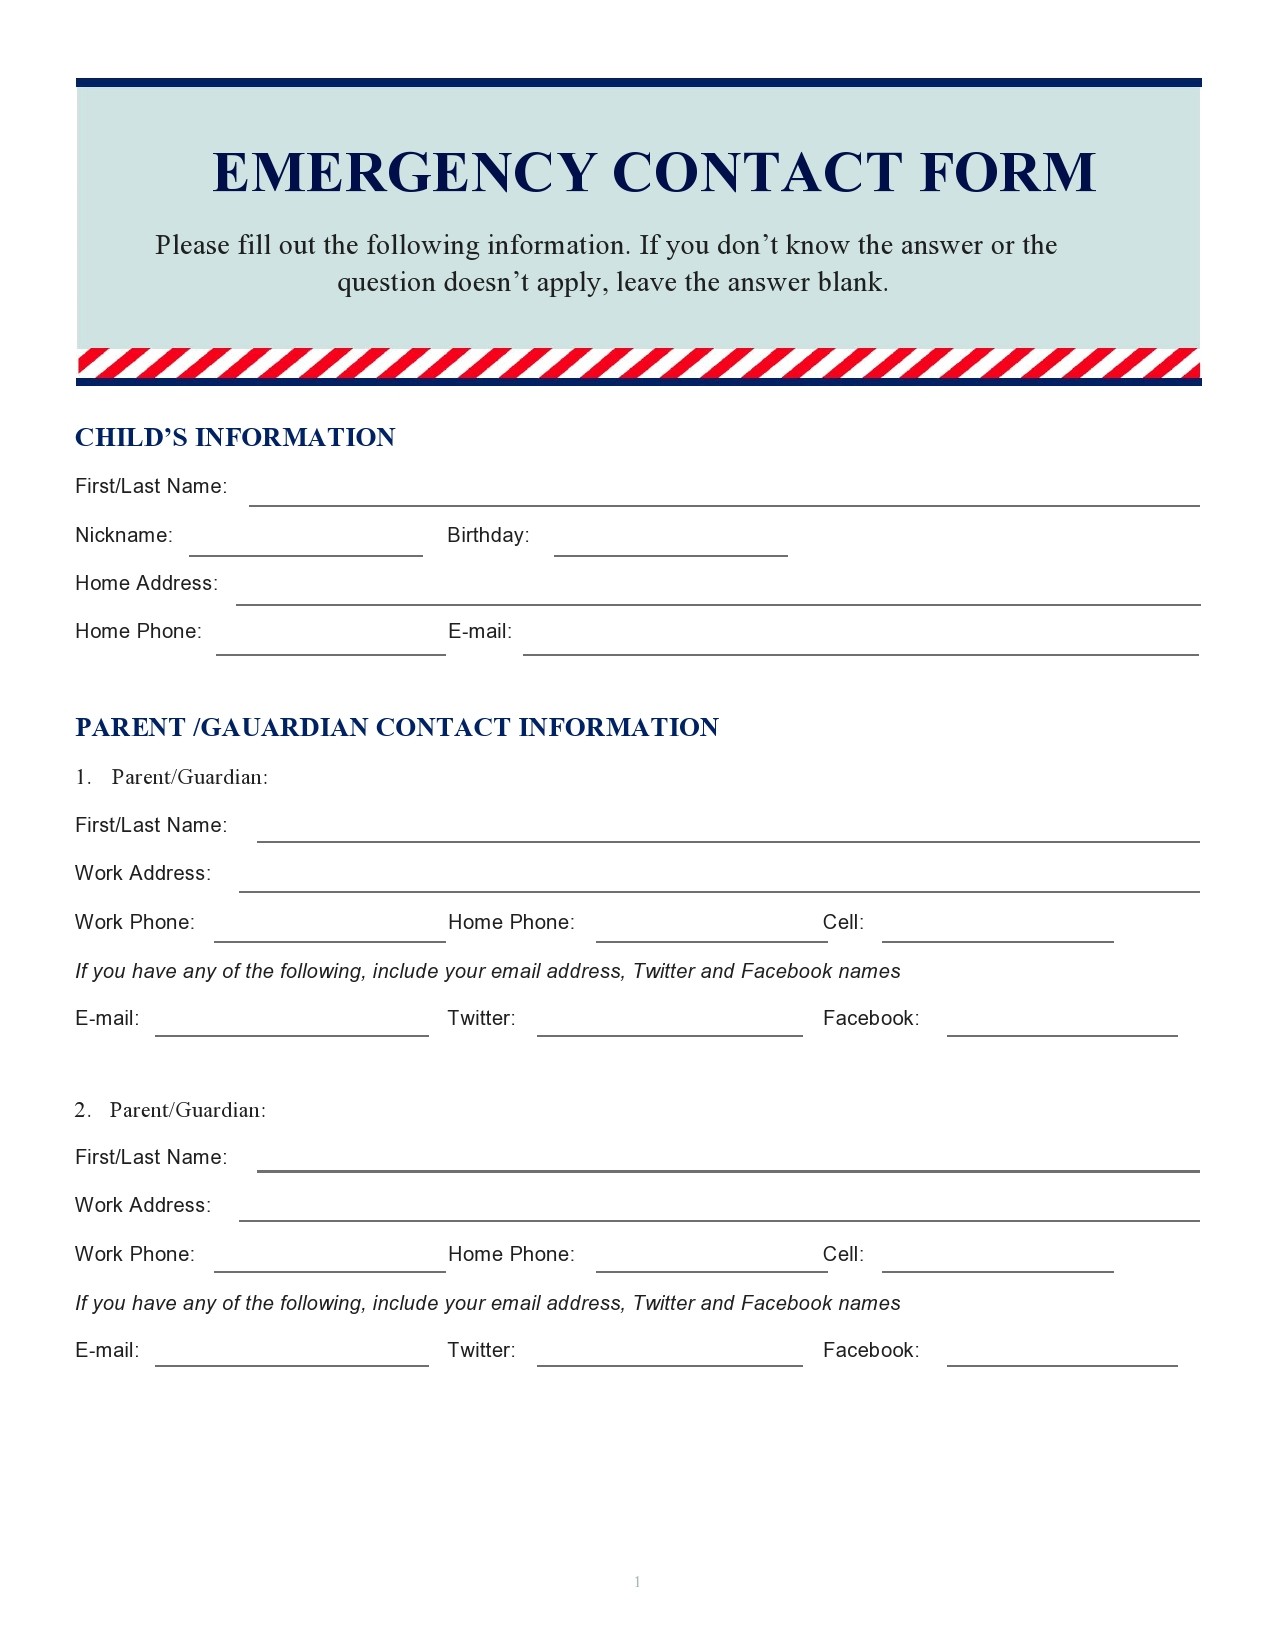 Free emergency contact form 39